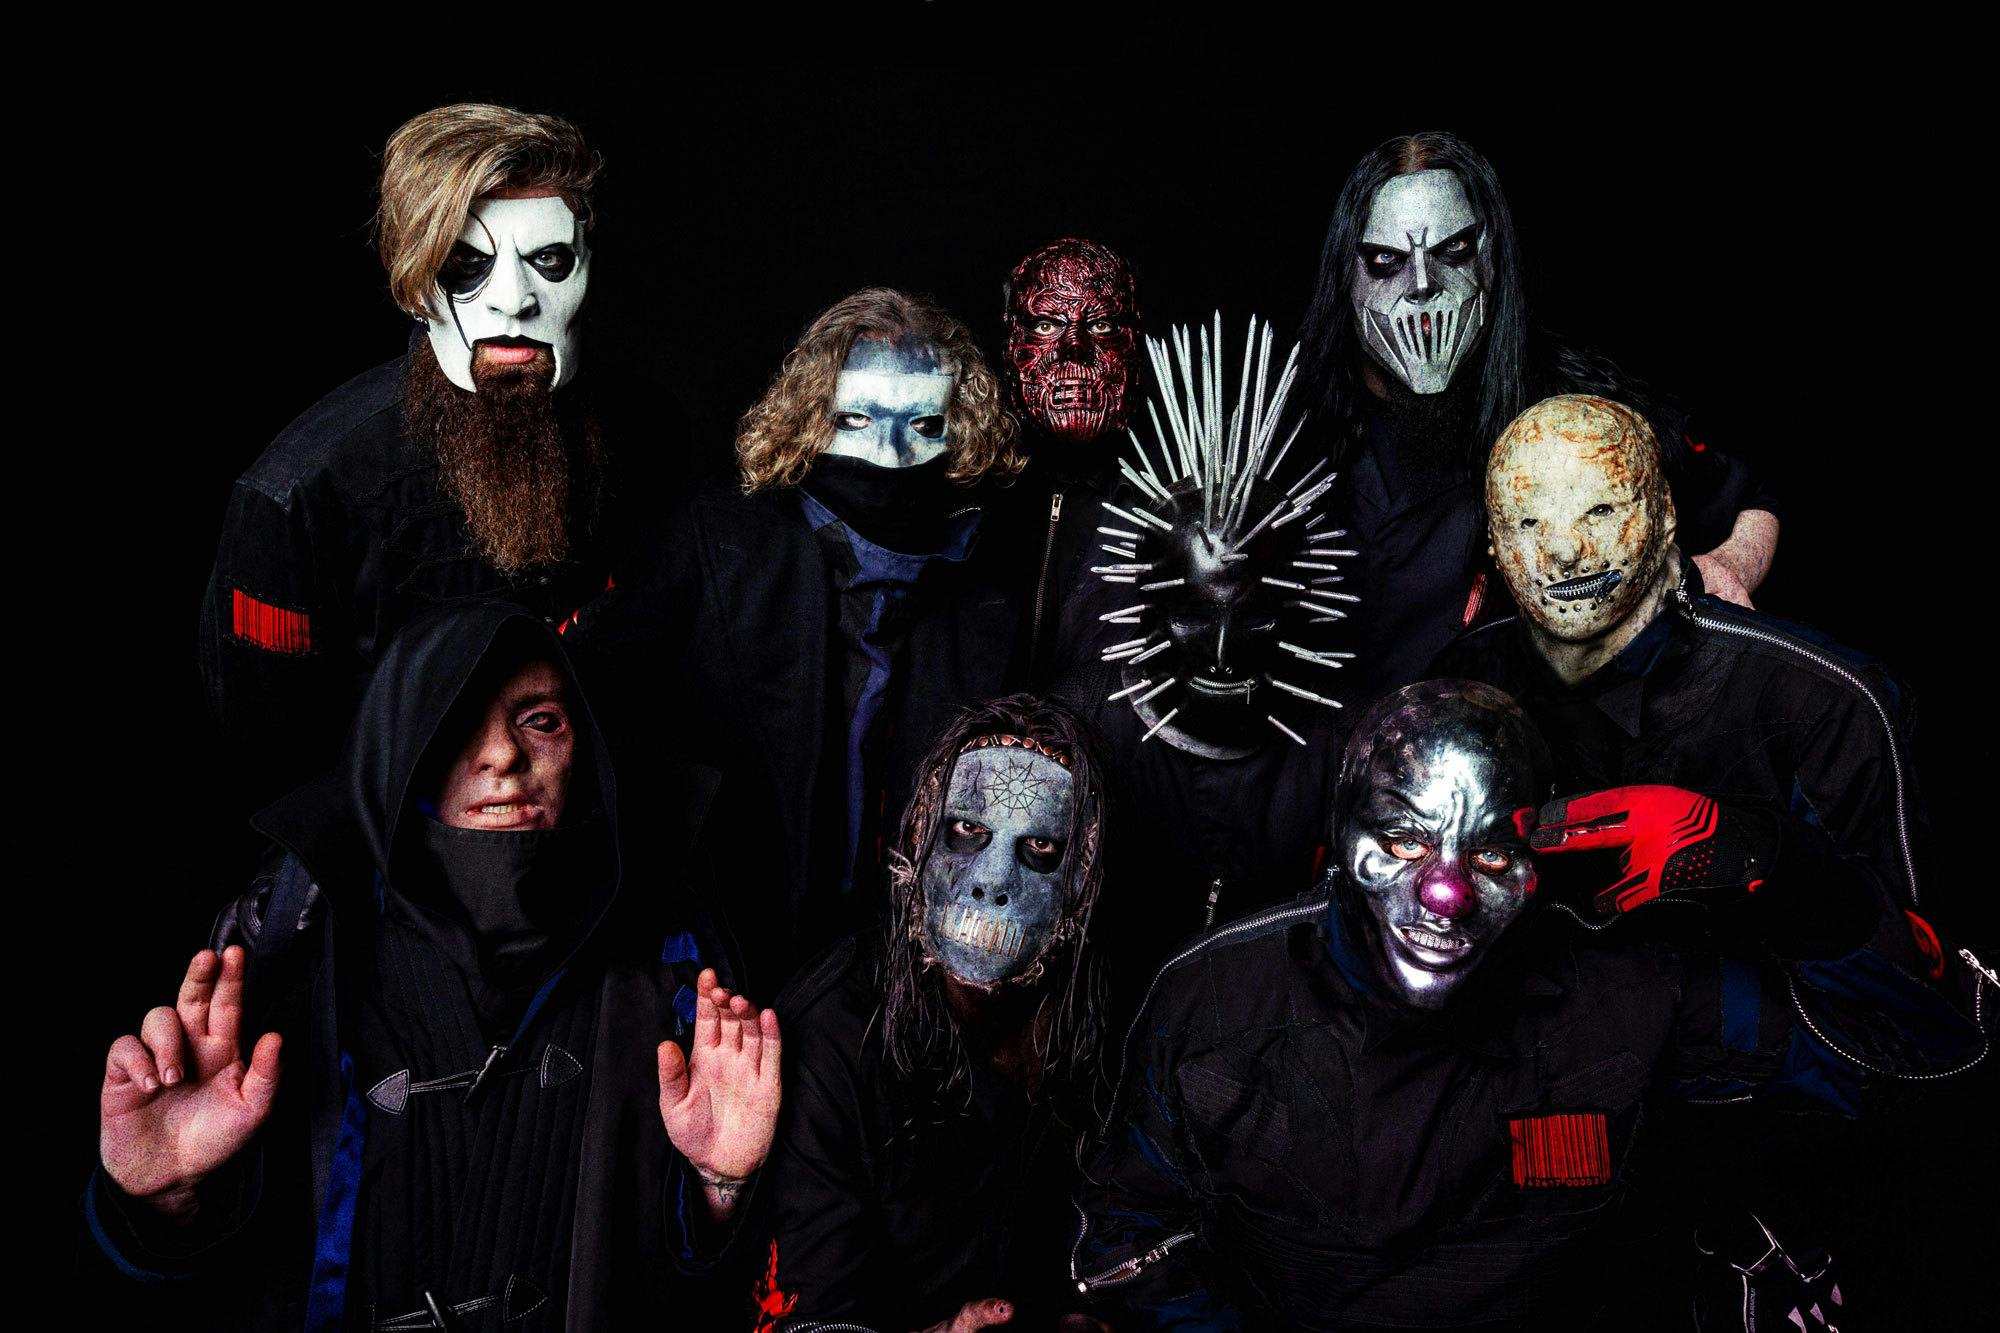 Slipknot are working on “cool stuff”, says Corey Taylor